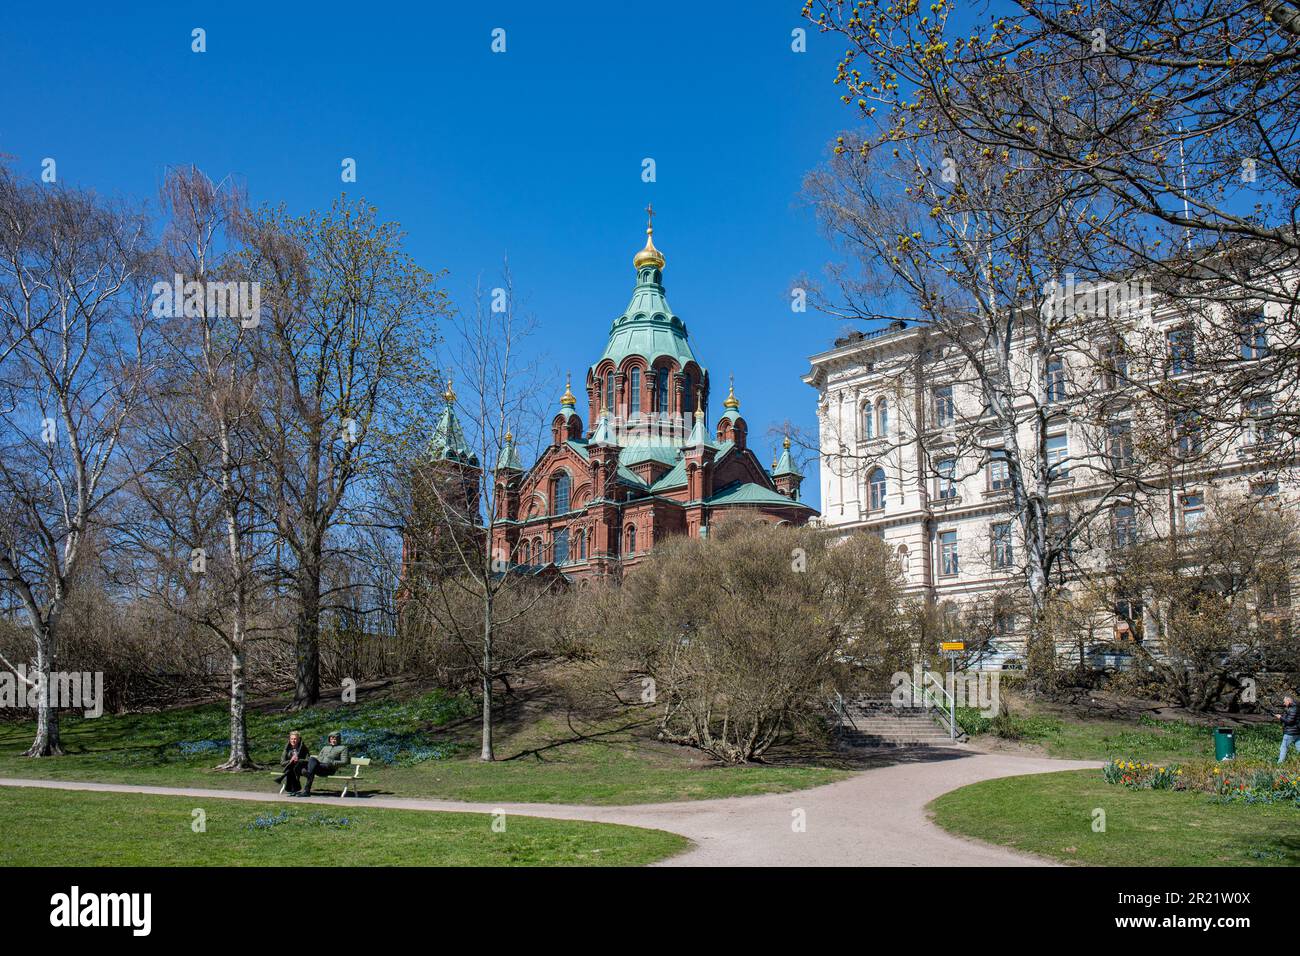 Tove Jansson Park and Uspenski Cathedral against clear blue sky on a sunny spring in Katajanokka district of Helsinki, Finland Stock Photo